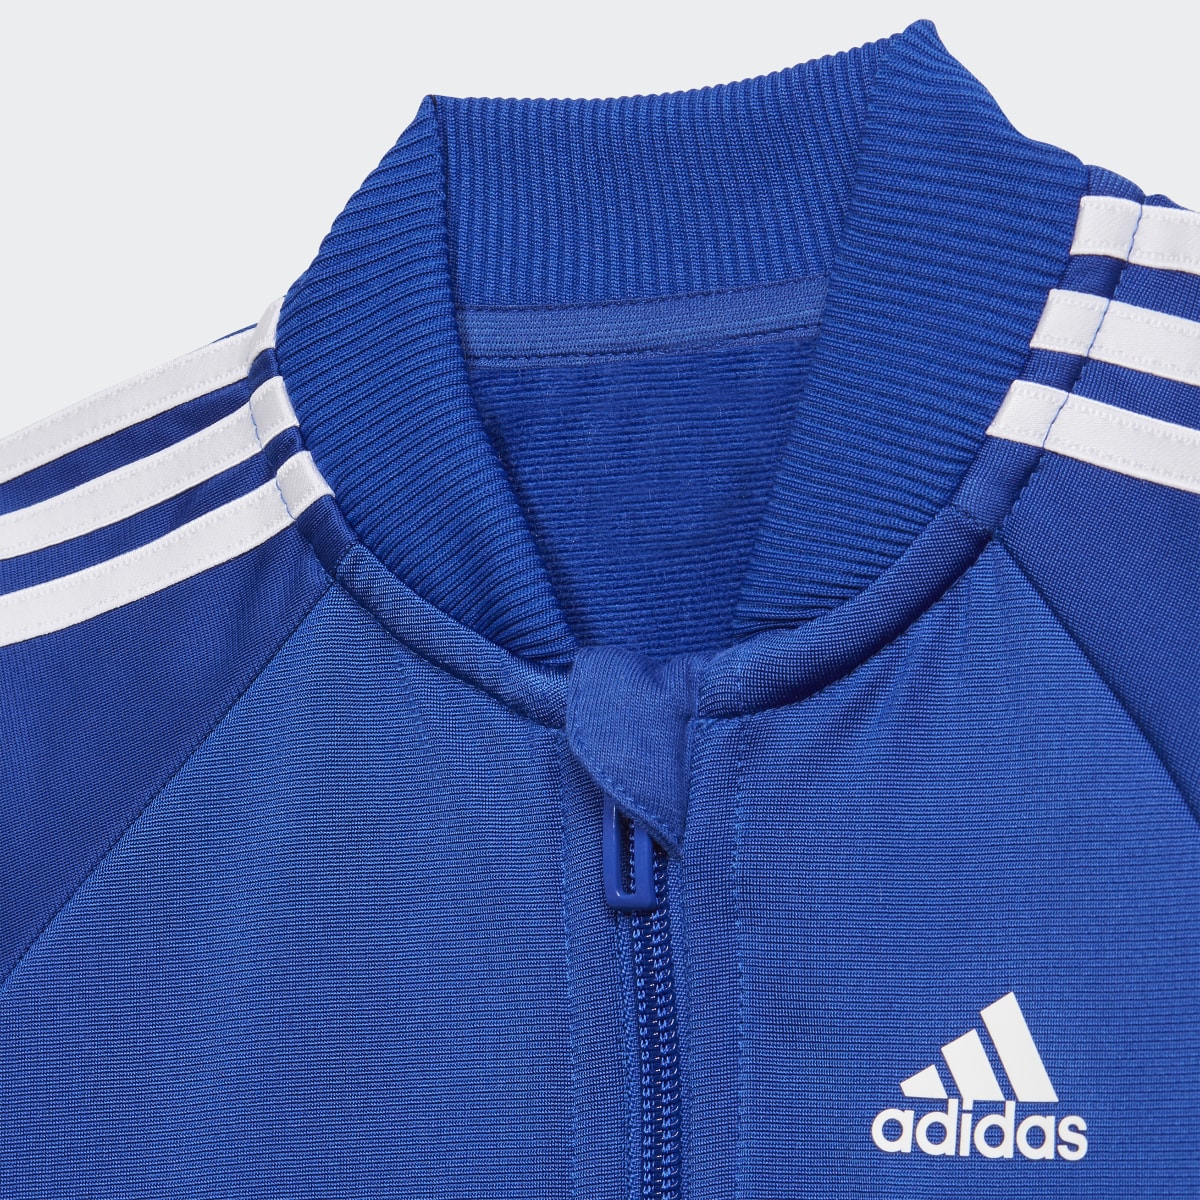 Adidas 3-Stripes Tricot Track Suit. 8